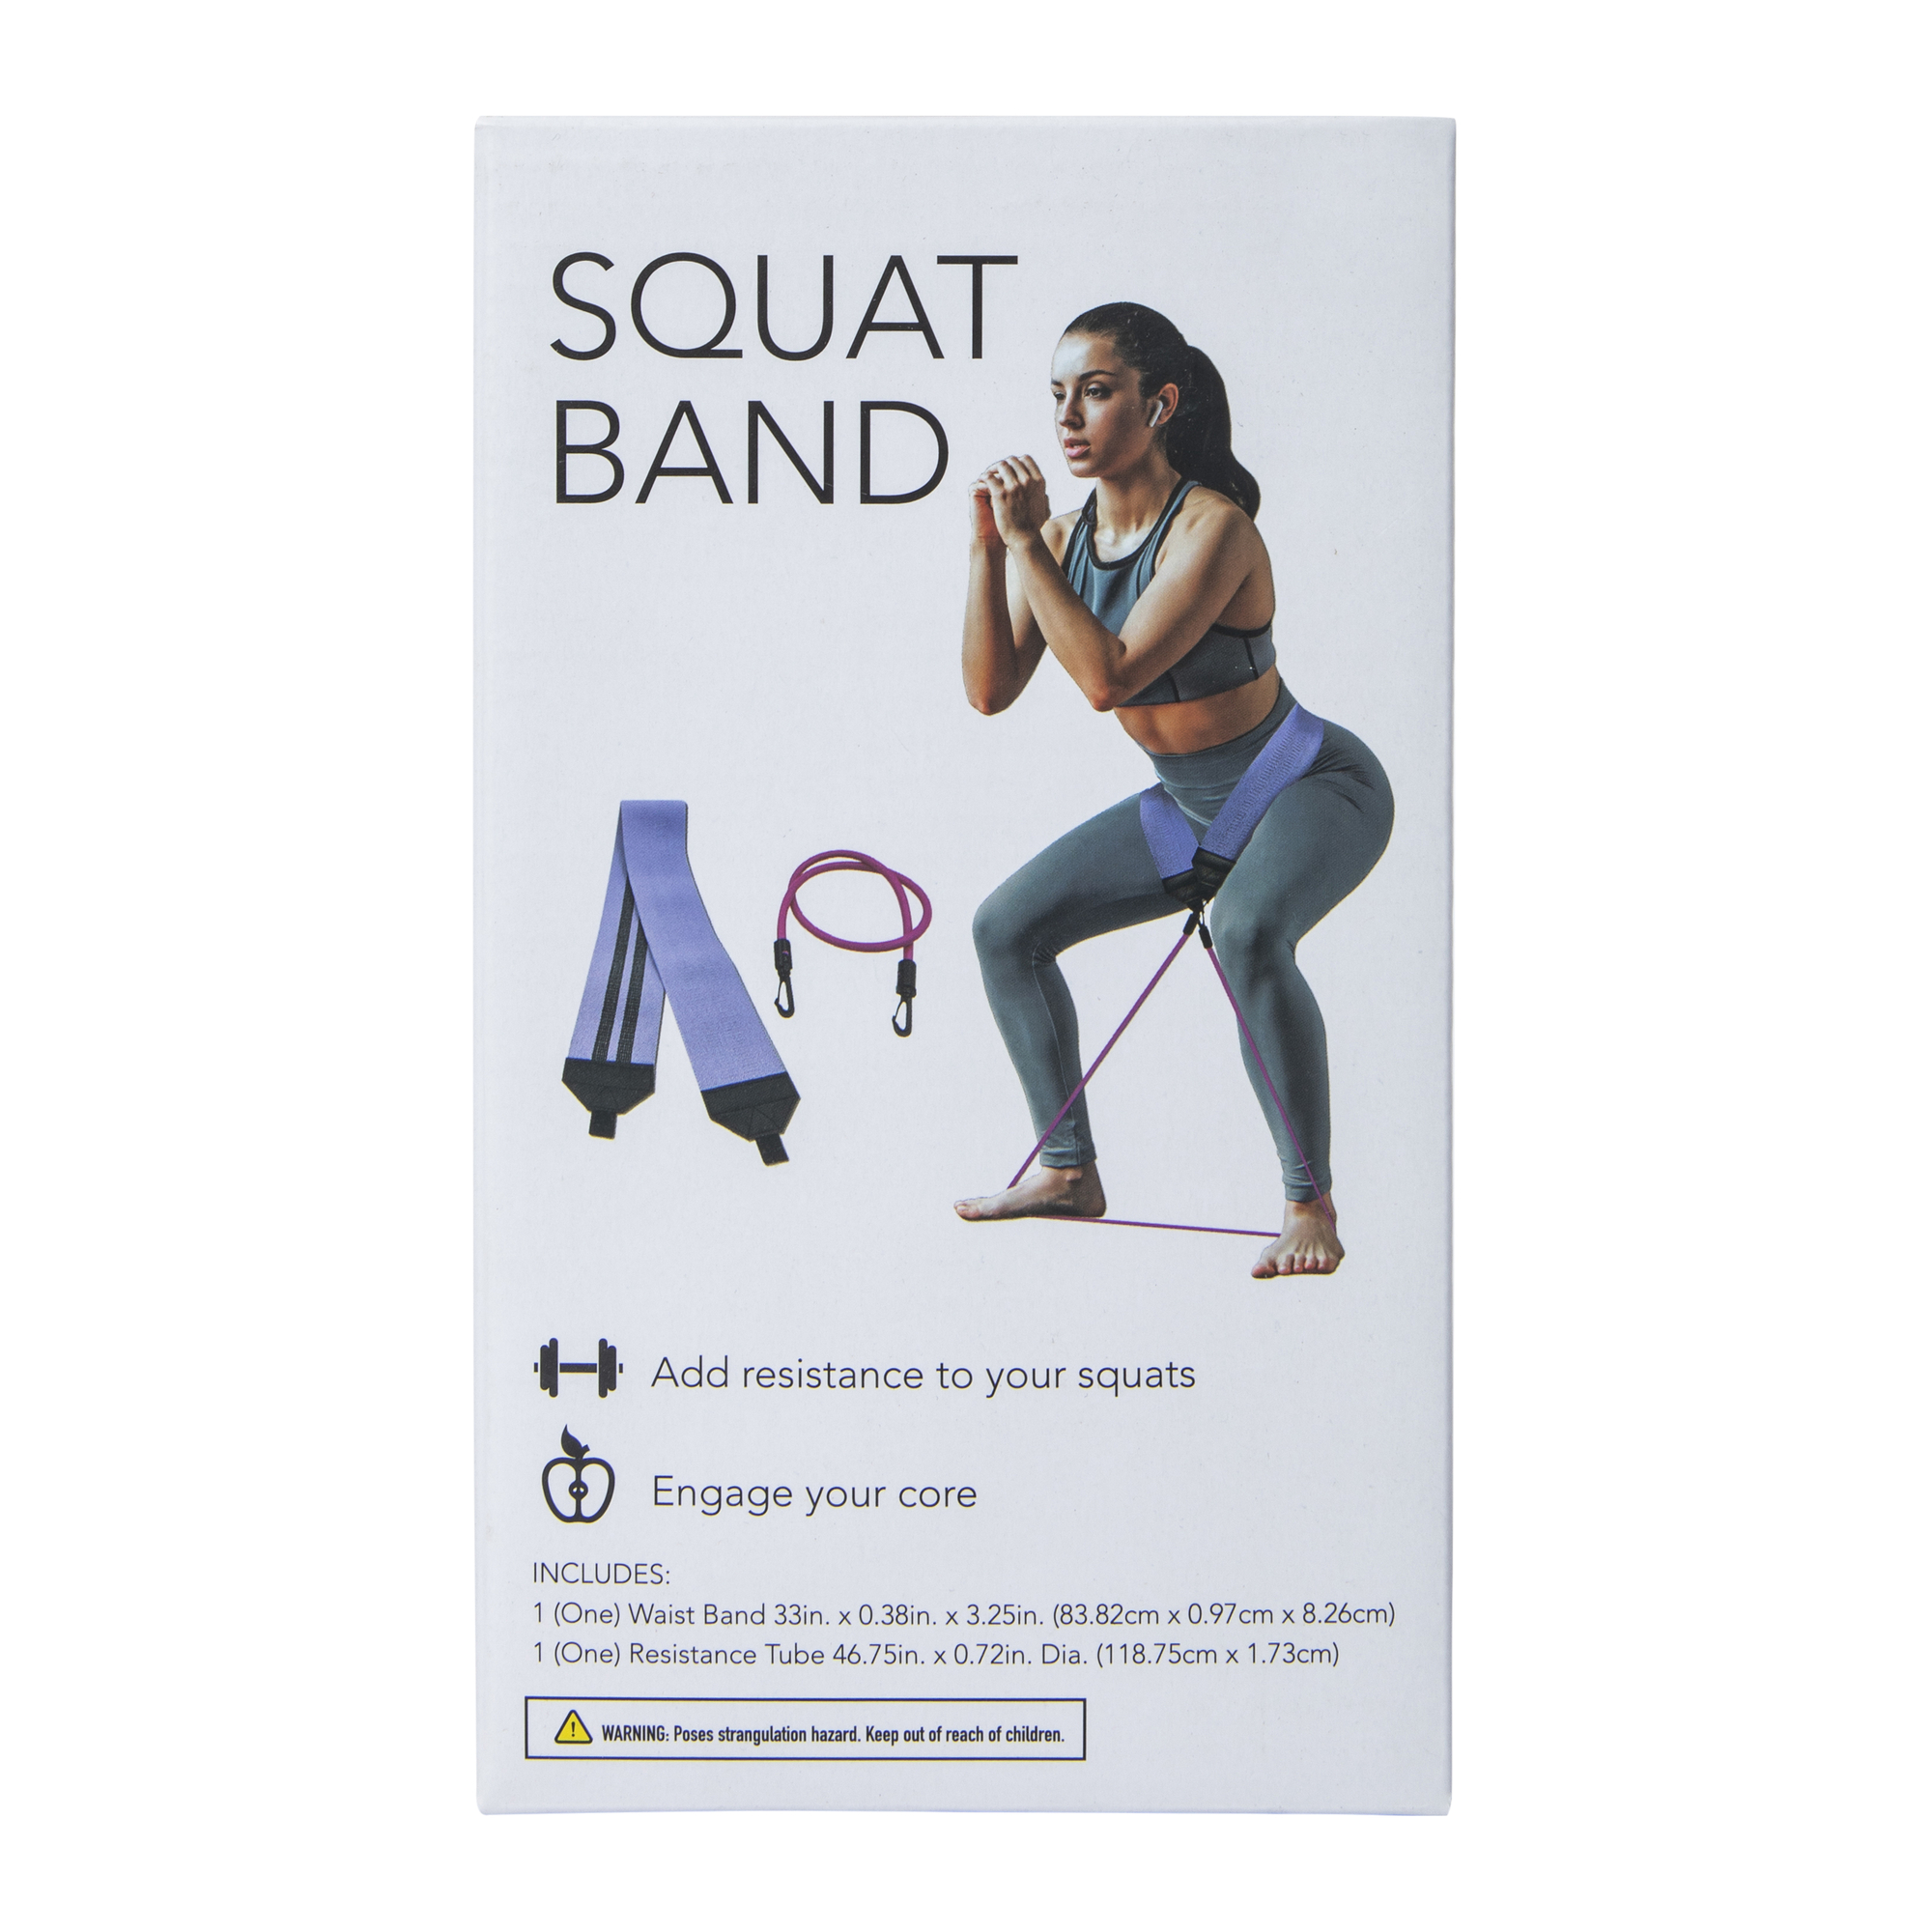 How to do a squat with resistance bands